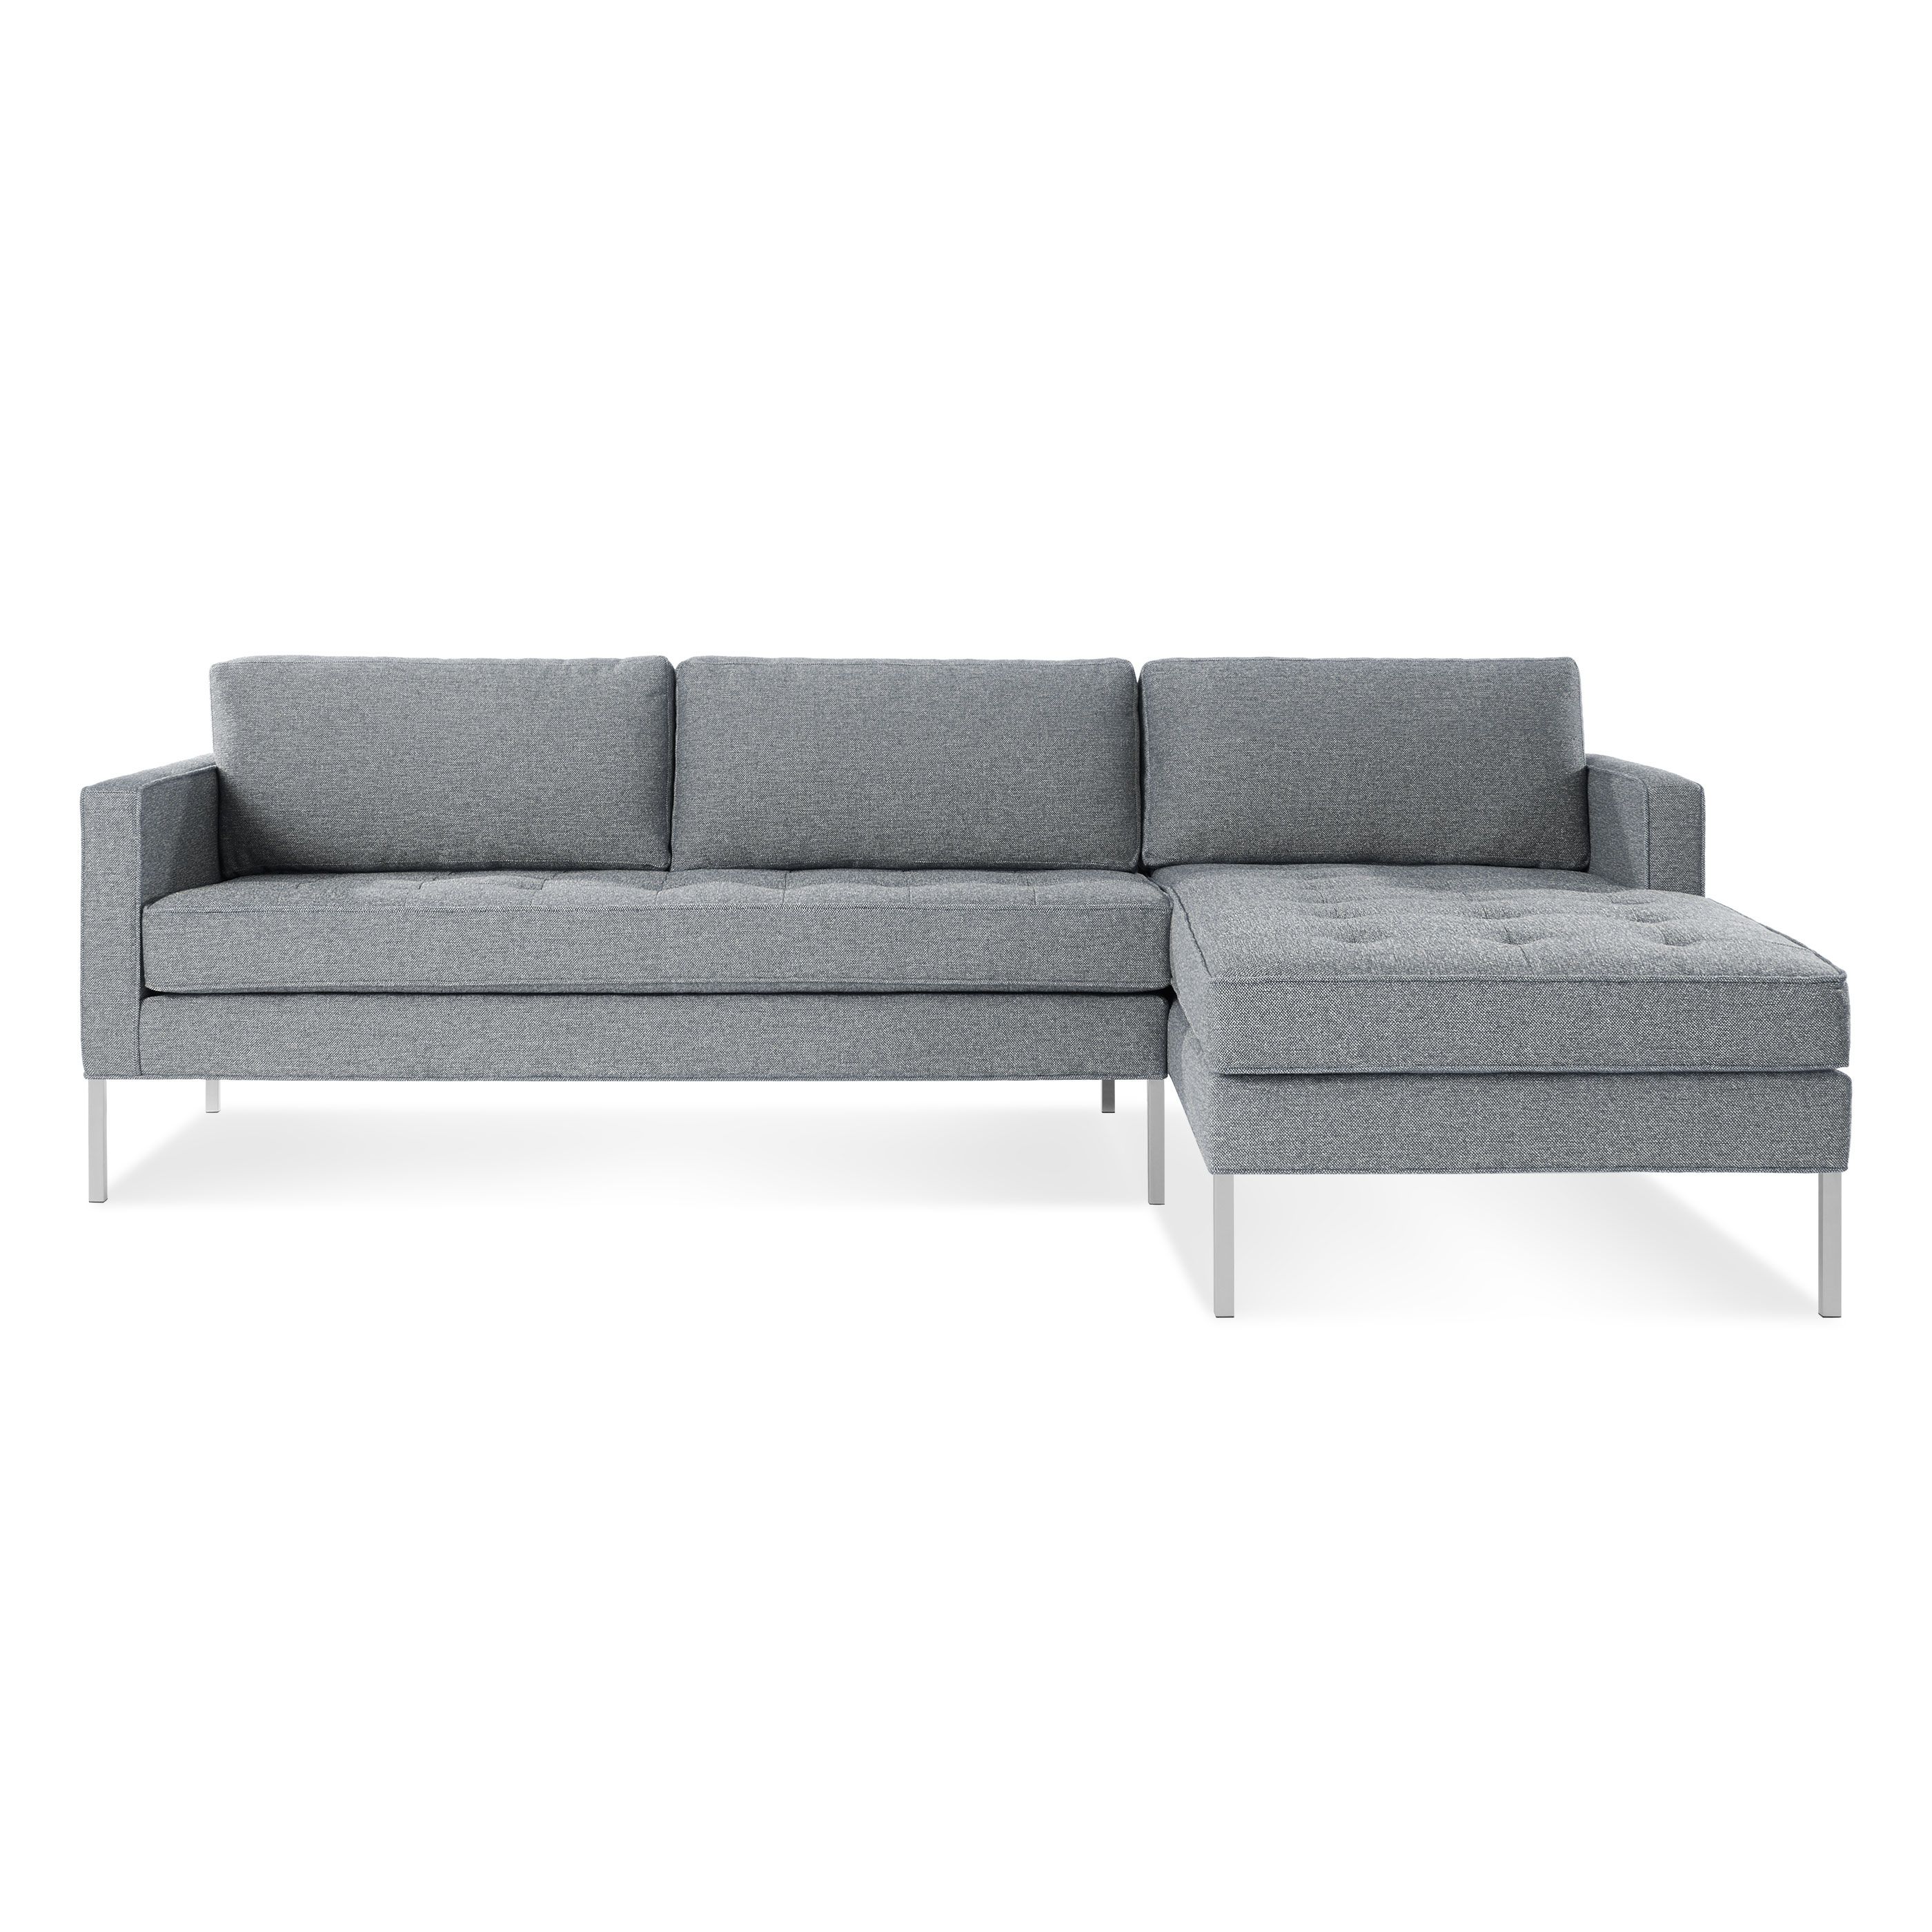 Paramount Tufted Sectional Sofa W/ Right Chaise | Blu Dot Within Tufted Sectional Sofas With Chaise (View 10 of 10)